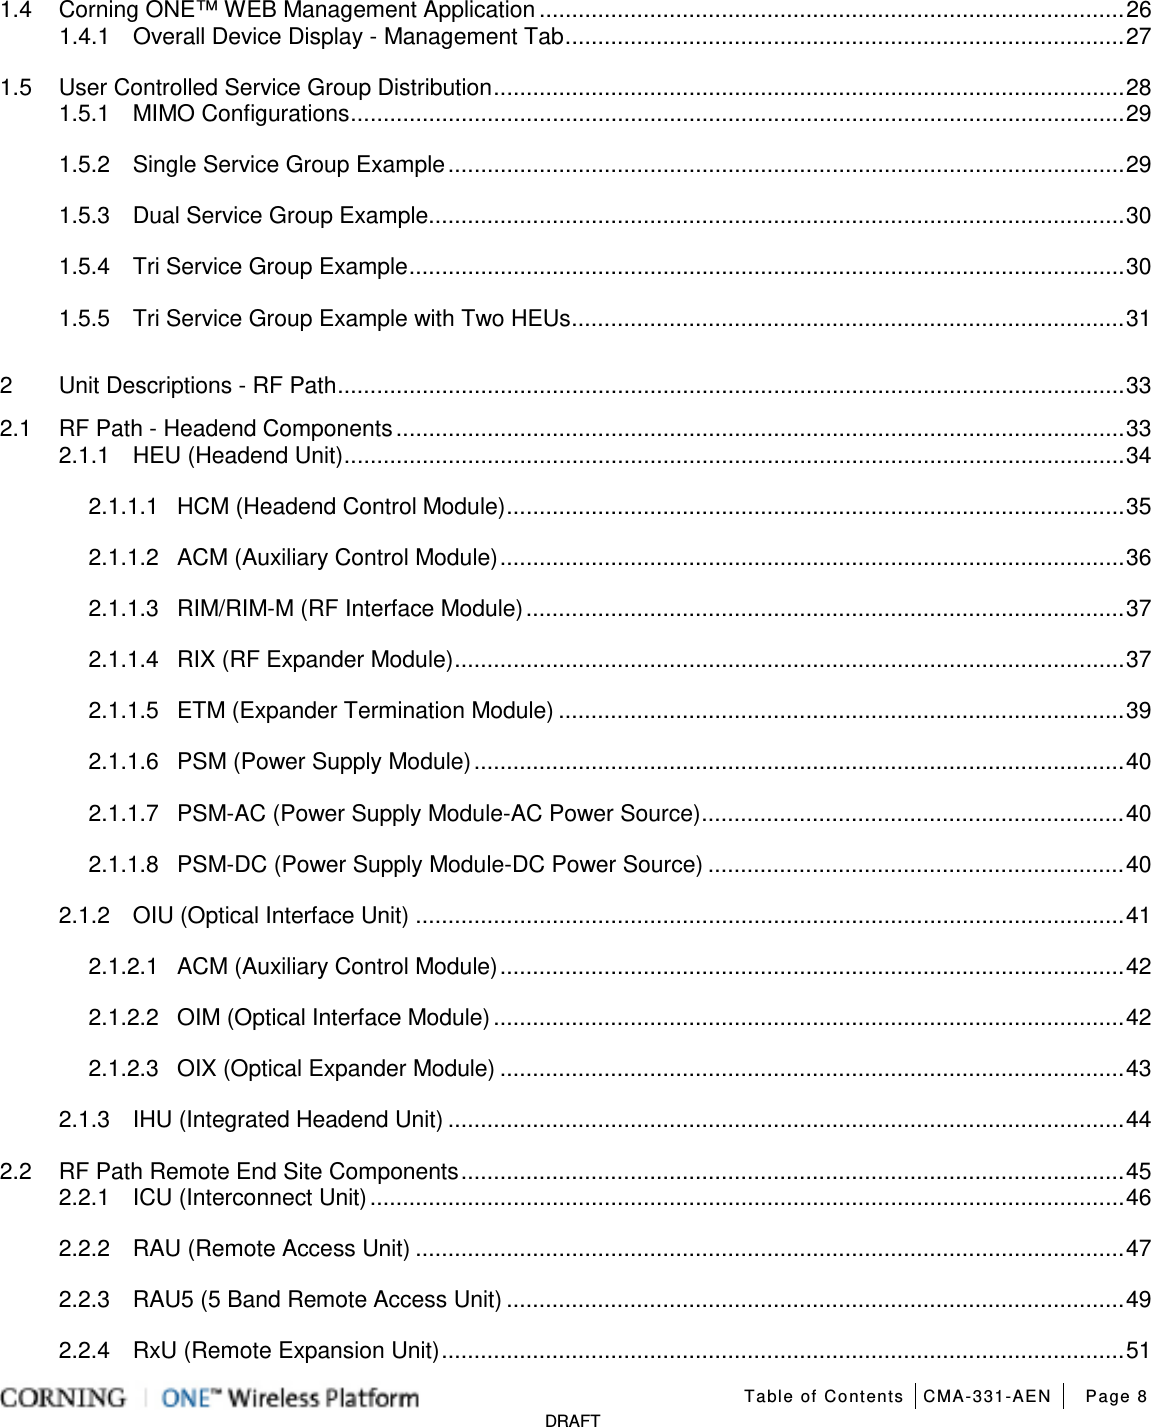   Table of Contents CMA-331-AEN Page 8   DRAFT 1.4 Corning ONE™ WEB Management Application .......................................................................................... 26 1.4.1 Overall Device Display - Management Tab ...................................................................................... 27 1.5 User Controlled Service Group Distribution ................................................................................................. 28 1.5.1 MIMO Configurations ....................................................................................................................... 29 1.5.2 Single Service Group Example ........................................................................................................ 29 1.5.3 Dual Service Group Example........................................................................................................... 30 1.5.4 Tri Service Group Example .............................................................................................................. 30 1.5.5 Tri Service Group Example with Two HEUs ..................................................................................... 31 2 Unit Descriptions - RF Path ......................................................................................................................... 33 2.1 RF Path - Headend Components ................................................................................................................ 33 2.1.1 HEU (Headend Unit) ........................................................................................................................ 34 2.1.1.1 HCM (Headend Control Module) ............................................................................................... 35 2.1.1.2 ACM (Auxiliary Control Module) ................................................................................................ 36 2.1.1.3 RIM/RIM-M (RF Interface Module) ............................................................................................ 37 2.1.1.4 RIX (RF Expander Module) ....................................................................................................... 37 2.1.1.5 ETM (Expander Termination Module) ....................................................................................... 39 2.1.1.6 PSM (Power Supply Module) .................................................................................................... 40 2.1.1.7 PSM-AC (Power Supply Module-AC Power Source) ................................................................. 40 2.1.1.8 PSM-DC (Power Supply Module-DC Power Source) ................................................................ 40 2.1.2 OIU (Optical Interface Unit) ............................................................................................................. 41 2.1.2.1 ACM (Auxiliary Control Module) ................................................................................................ 42 2.1.2.2 OIM (Optical Interface Module) ................................................................................................. 42 2.1.2.3 OIX (Optical Expander Module) ................................................................................................ 43 2.1.3 IHU (Integrated Headend Unit) ........................................................................................................ 44 2.2 RF Path Remote End Site Components ...................................................................................................... 45 2.2.1 ICU (Interconnect Unit) .................................................................................................................... 46 2.2.2 RAU (Remote Access Unit) ............................................................................................................. 47 2.2.3 RAU5 (5 Band Remote Access Unit) ............................................................................................... 49 2.2.4 RxU (Remote Expansion Unit) ......................................................................................................... 51 